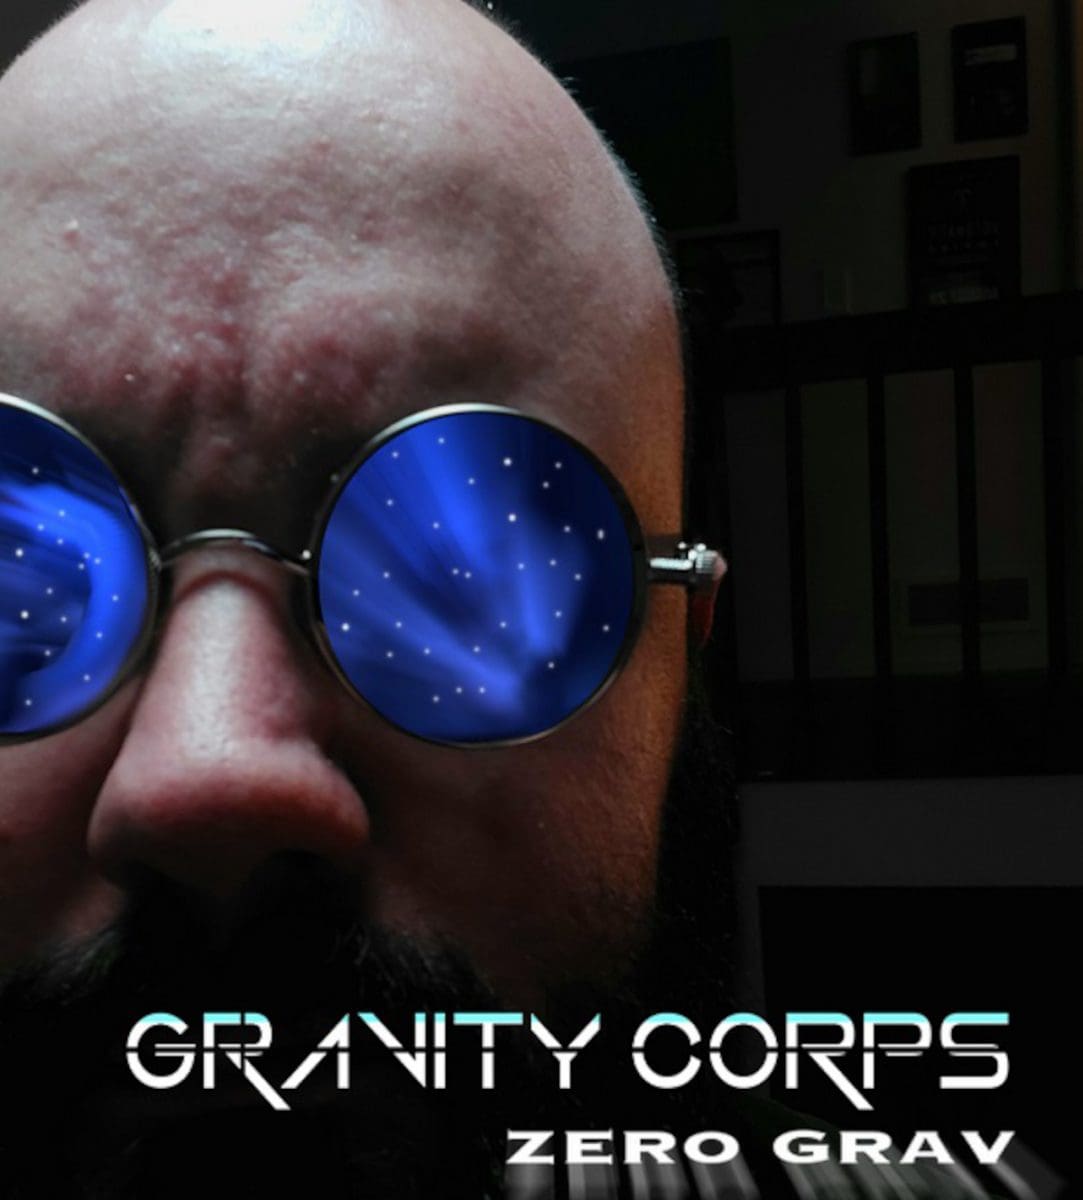 VoiceCoil side-project Gravity Corps drops debut EP 'Zero Grav' - check the video for 'Another Day'